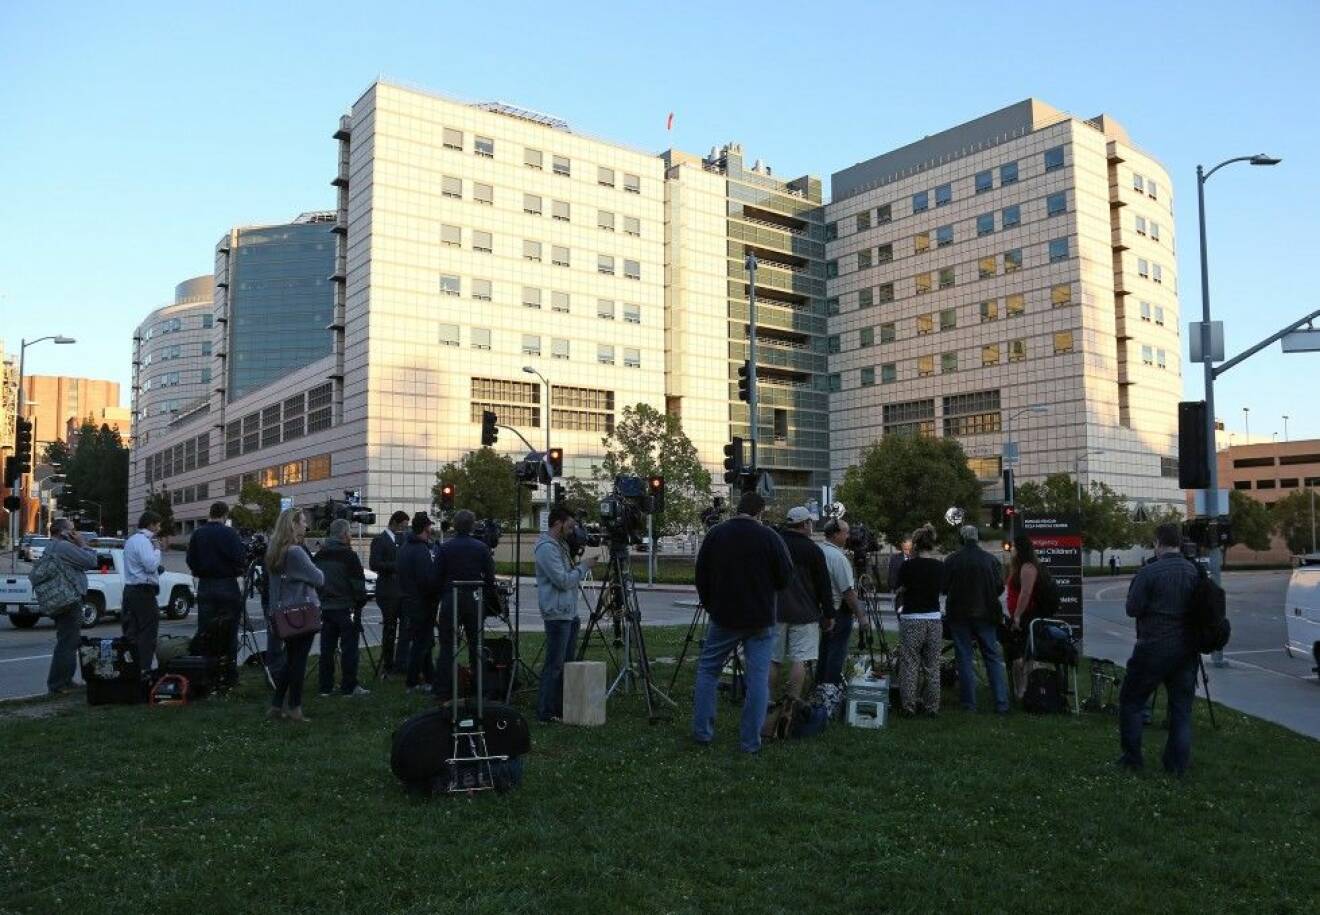 UCLA medical plaza where Harrison Ford is reported being treated after his plane crash in Santa Monica